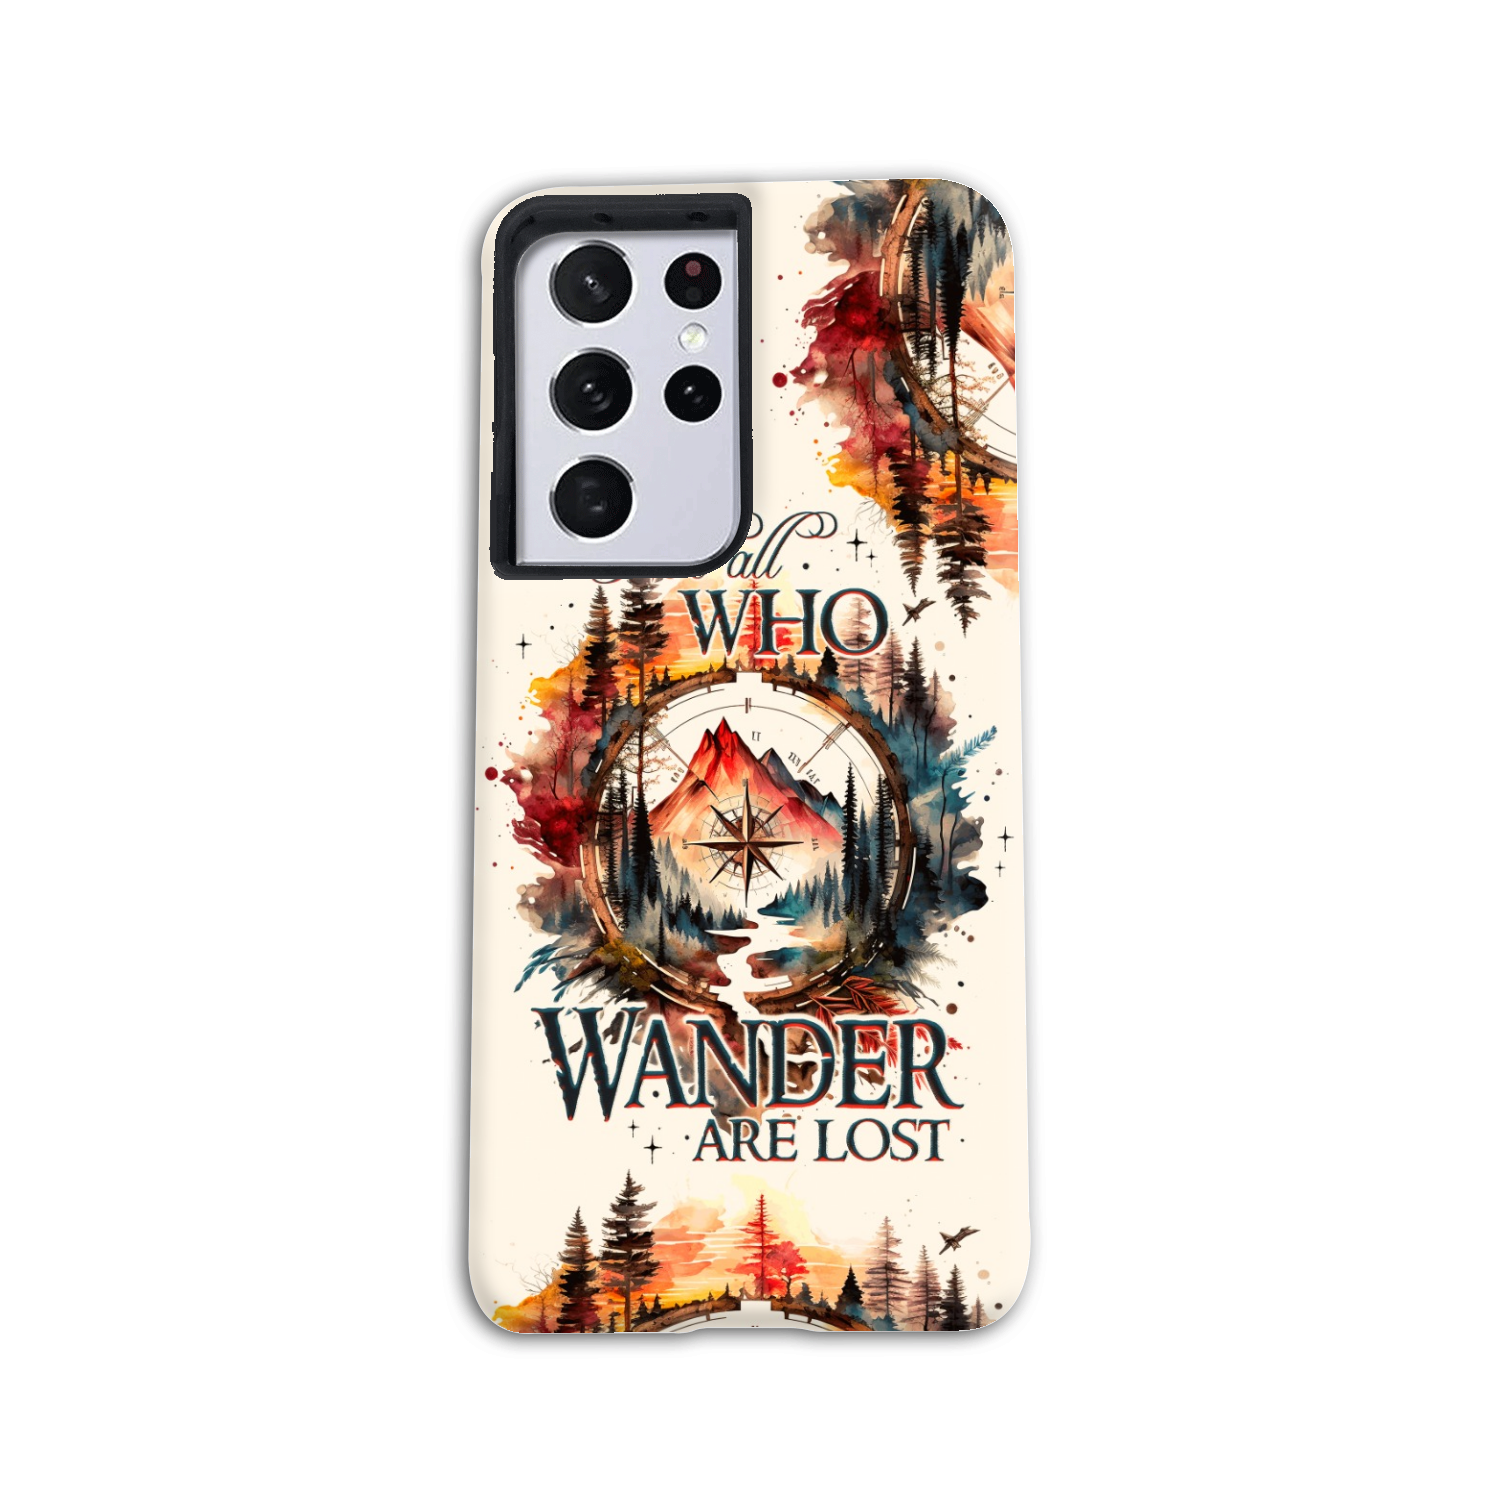 NOT ALL WHO WANDER ARE LOST PHONE CASE - TY1605235